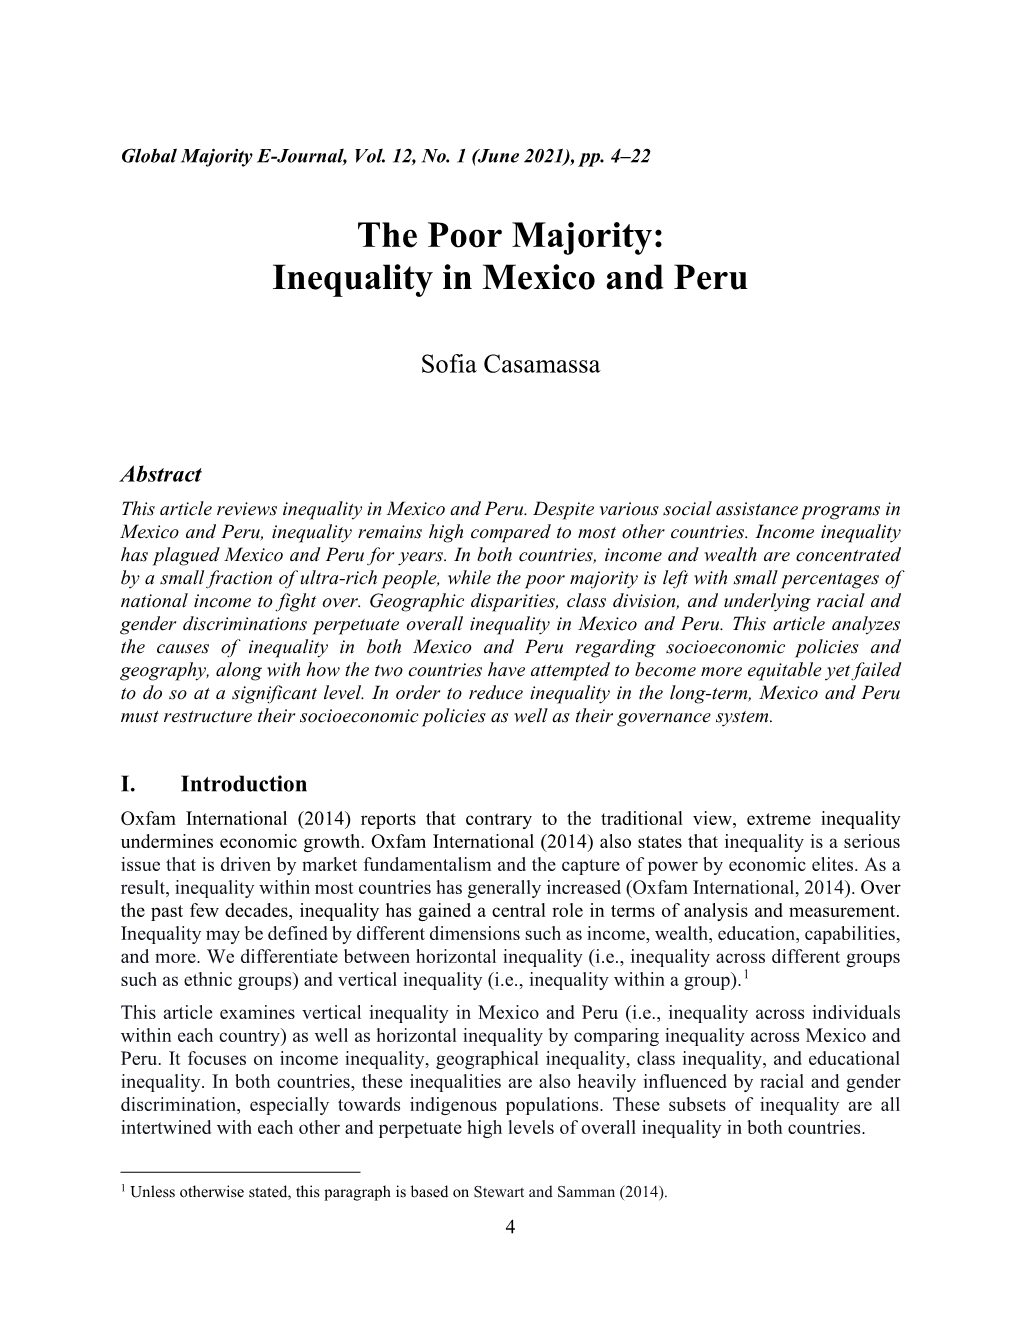 The Poor Majority: Inequality in Mexico and Peru